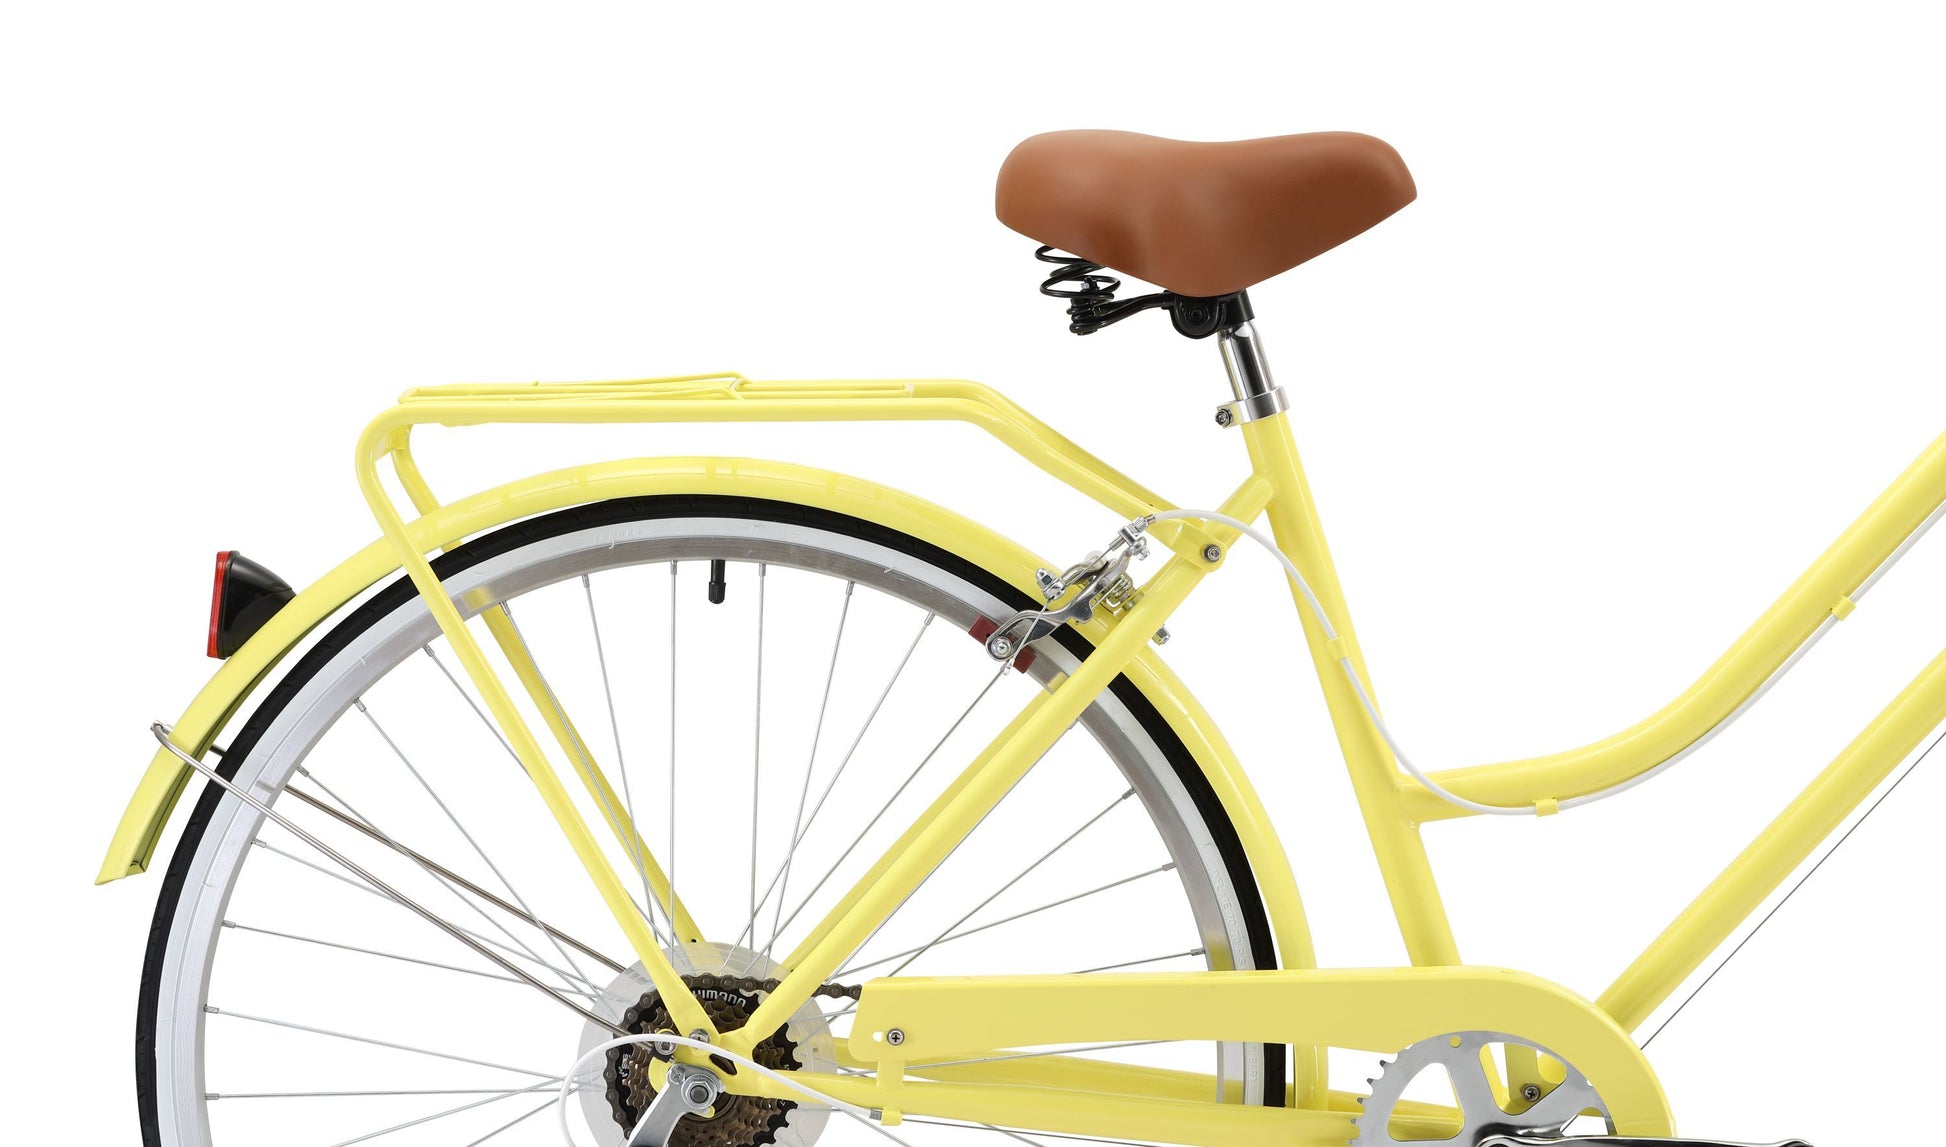 Ladies Classic Plus Vintage Bike in Lemon featuring rear pannier rack and red reflector from Reid Cycles Australia